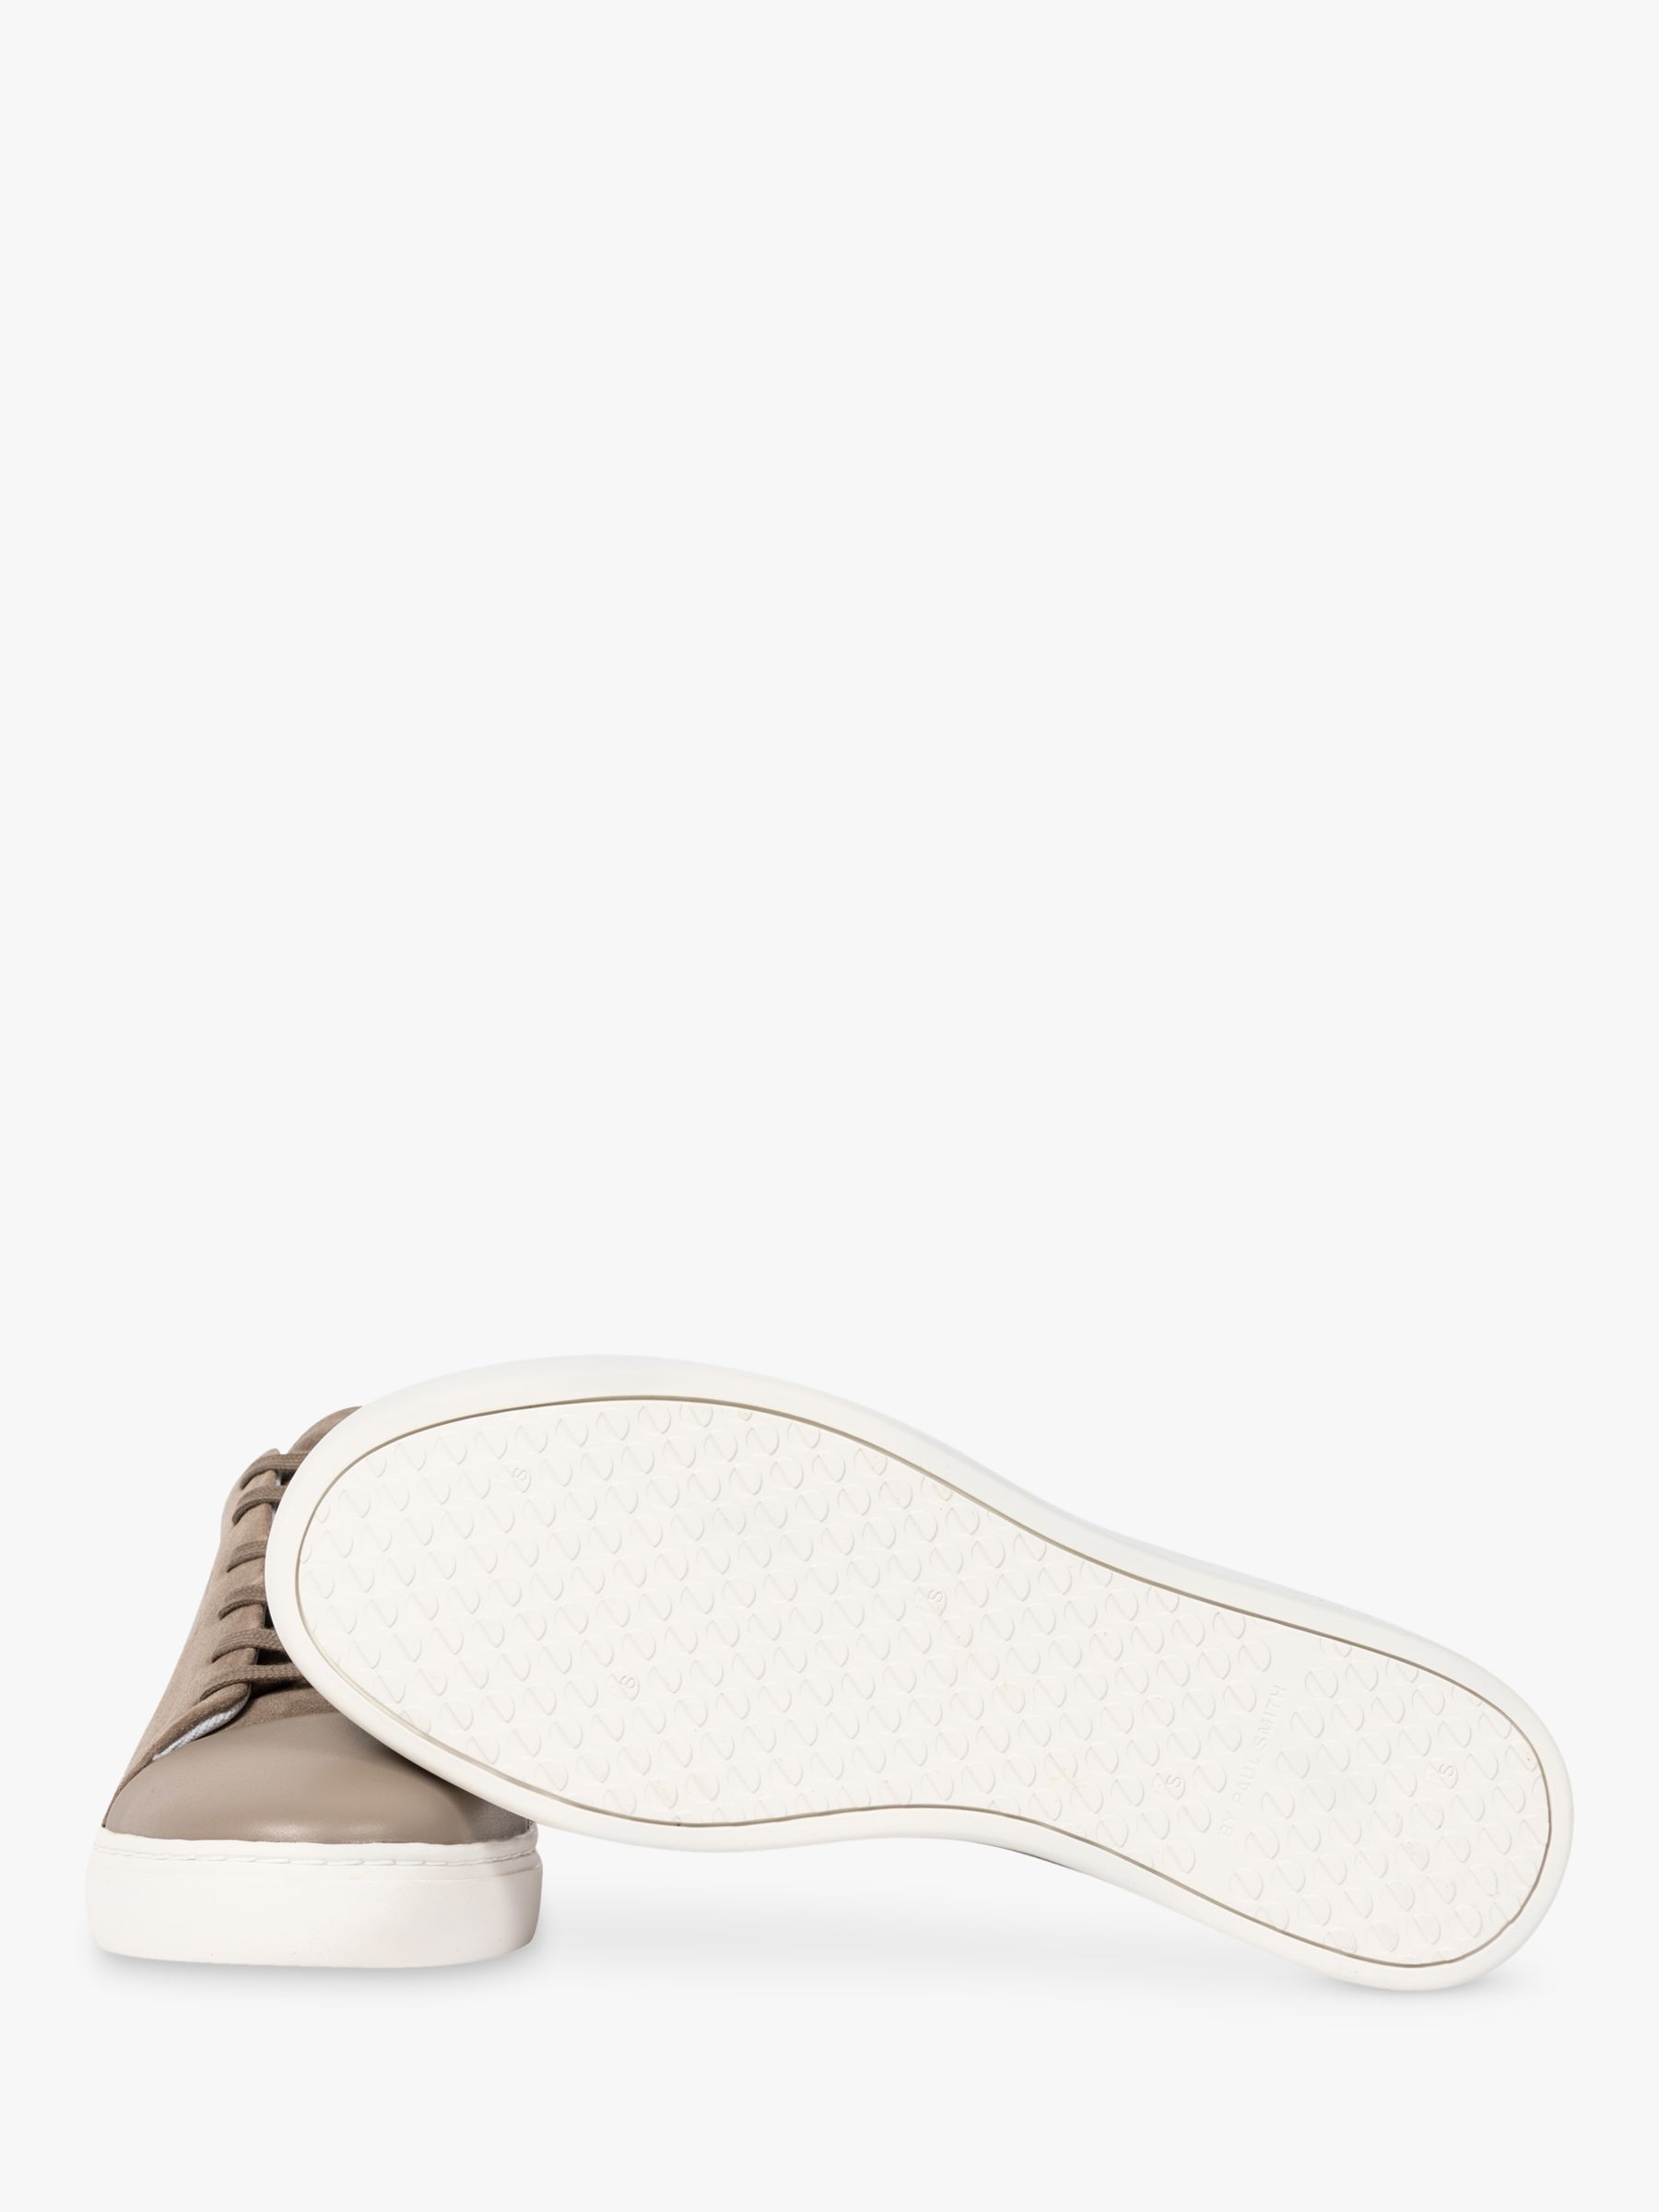 Paul Smith Lee Suede Trainers, Taupe, 7